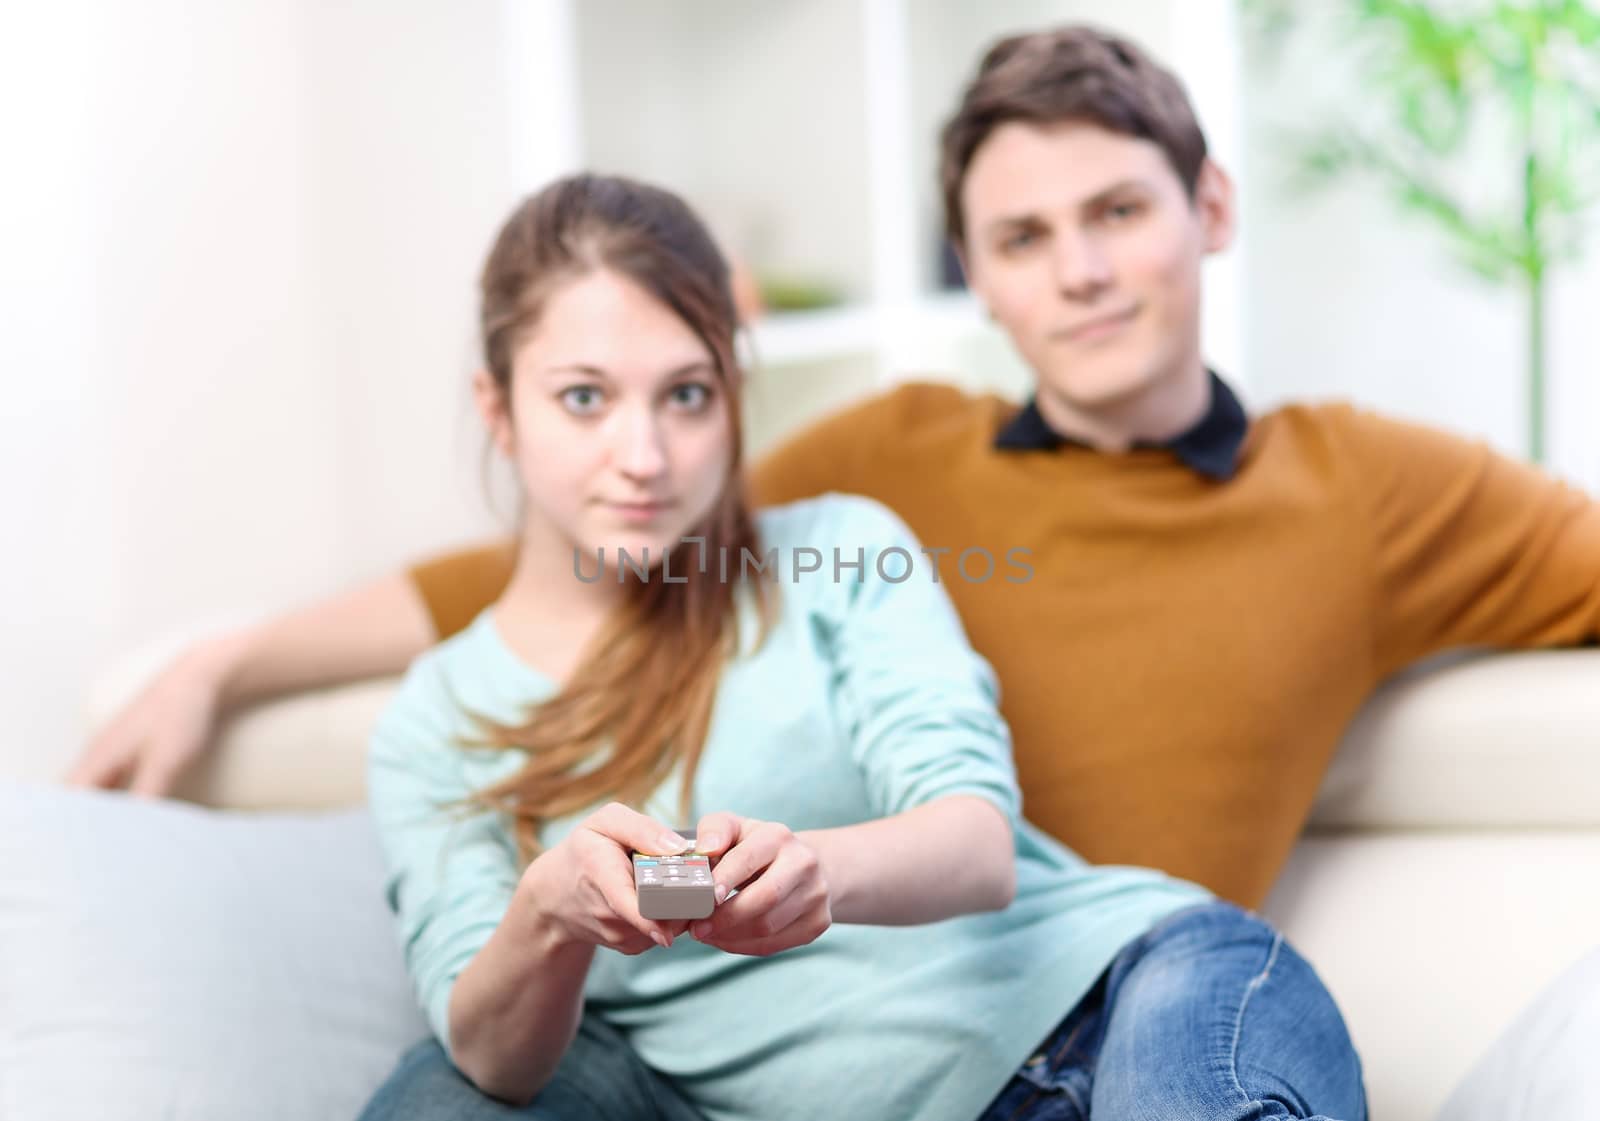 Couple sitting in sofa with remote control in hands